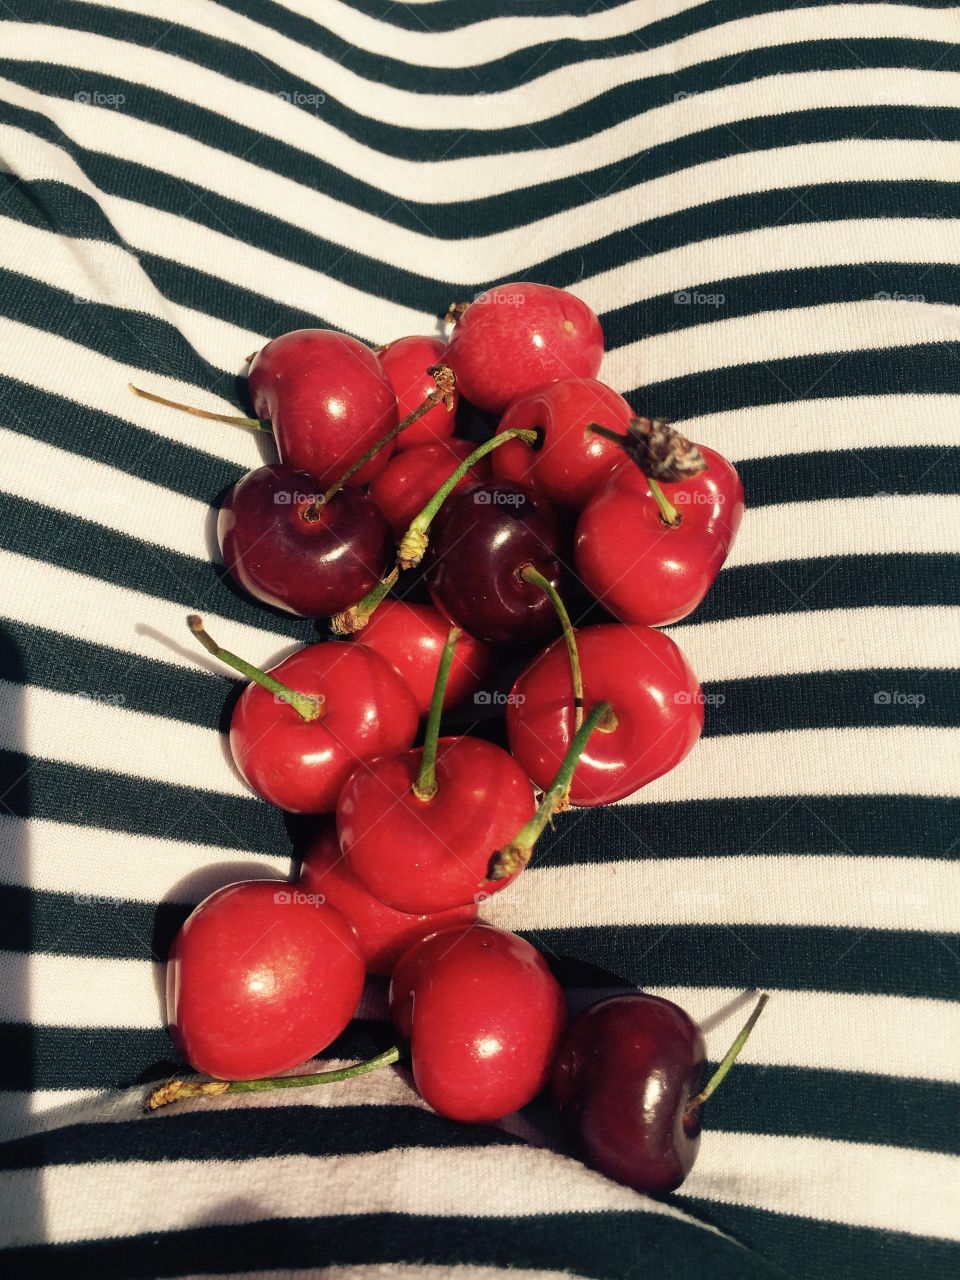 Cherries and stripes. Bought some beautiful cherries from the local farmers stand and the colors were so phenomenal I couldn't help shoot. 